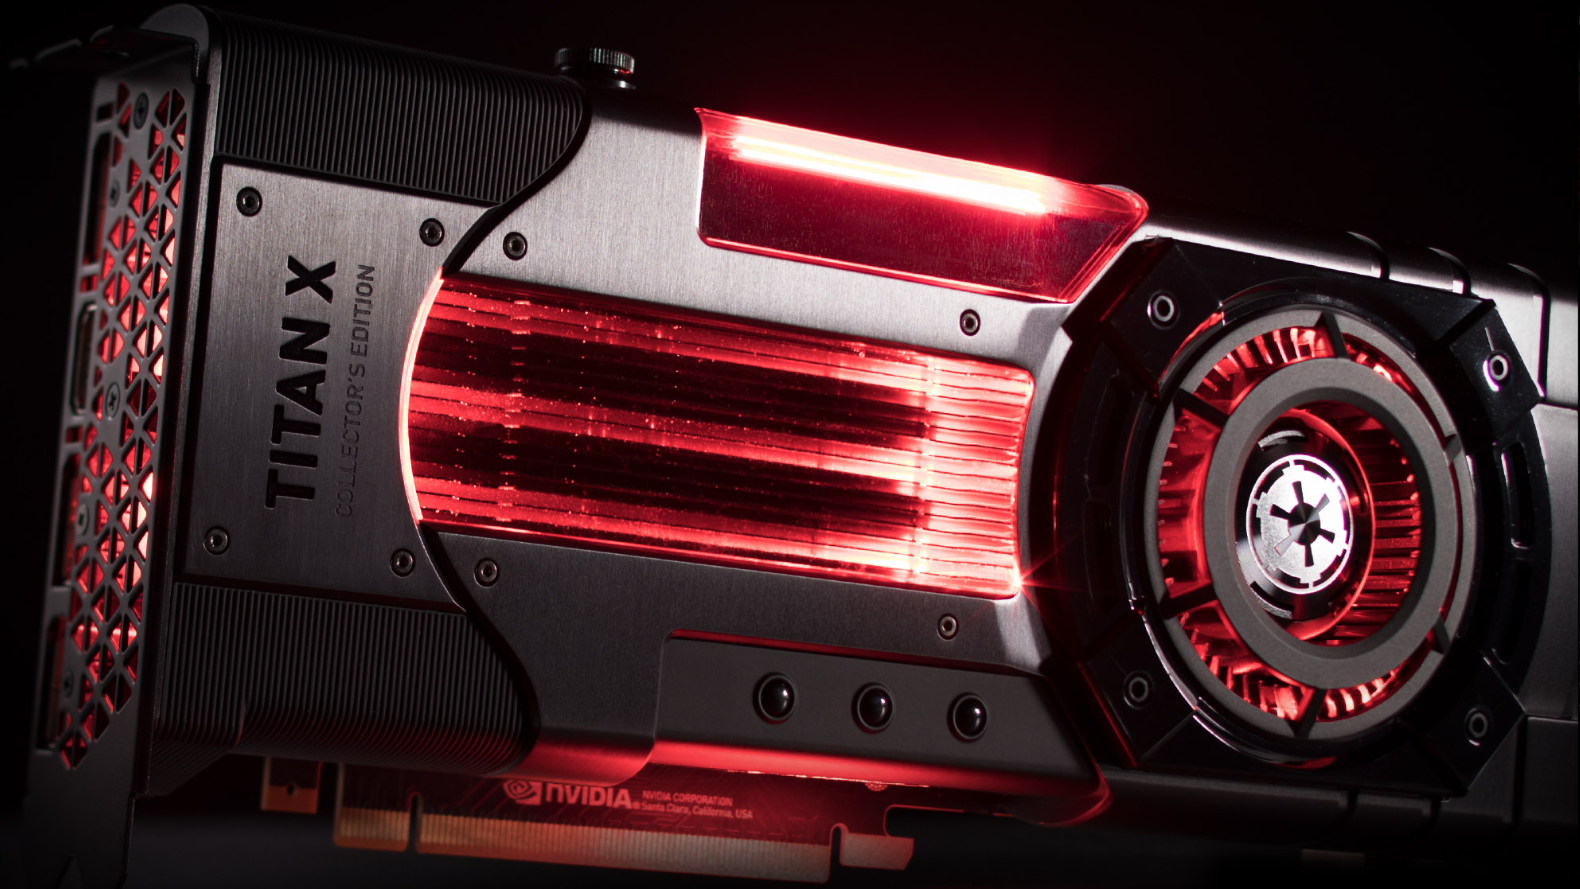 <div>This Star Wars themed PC with lightsaber SSDs has me dreaming of new versions of Nvidia's greatest special edition cards</div>